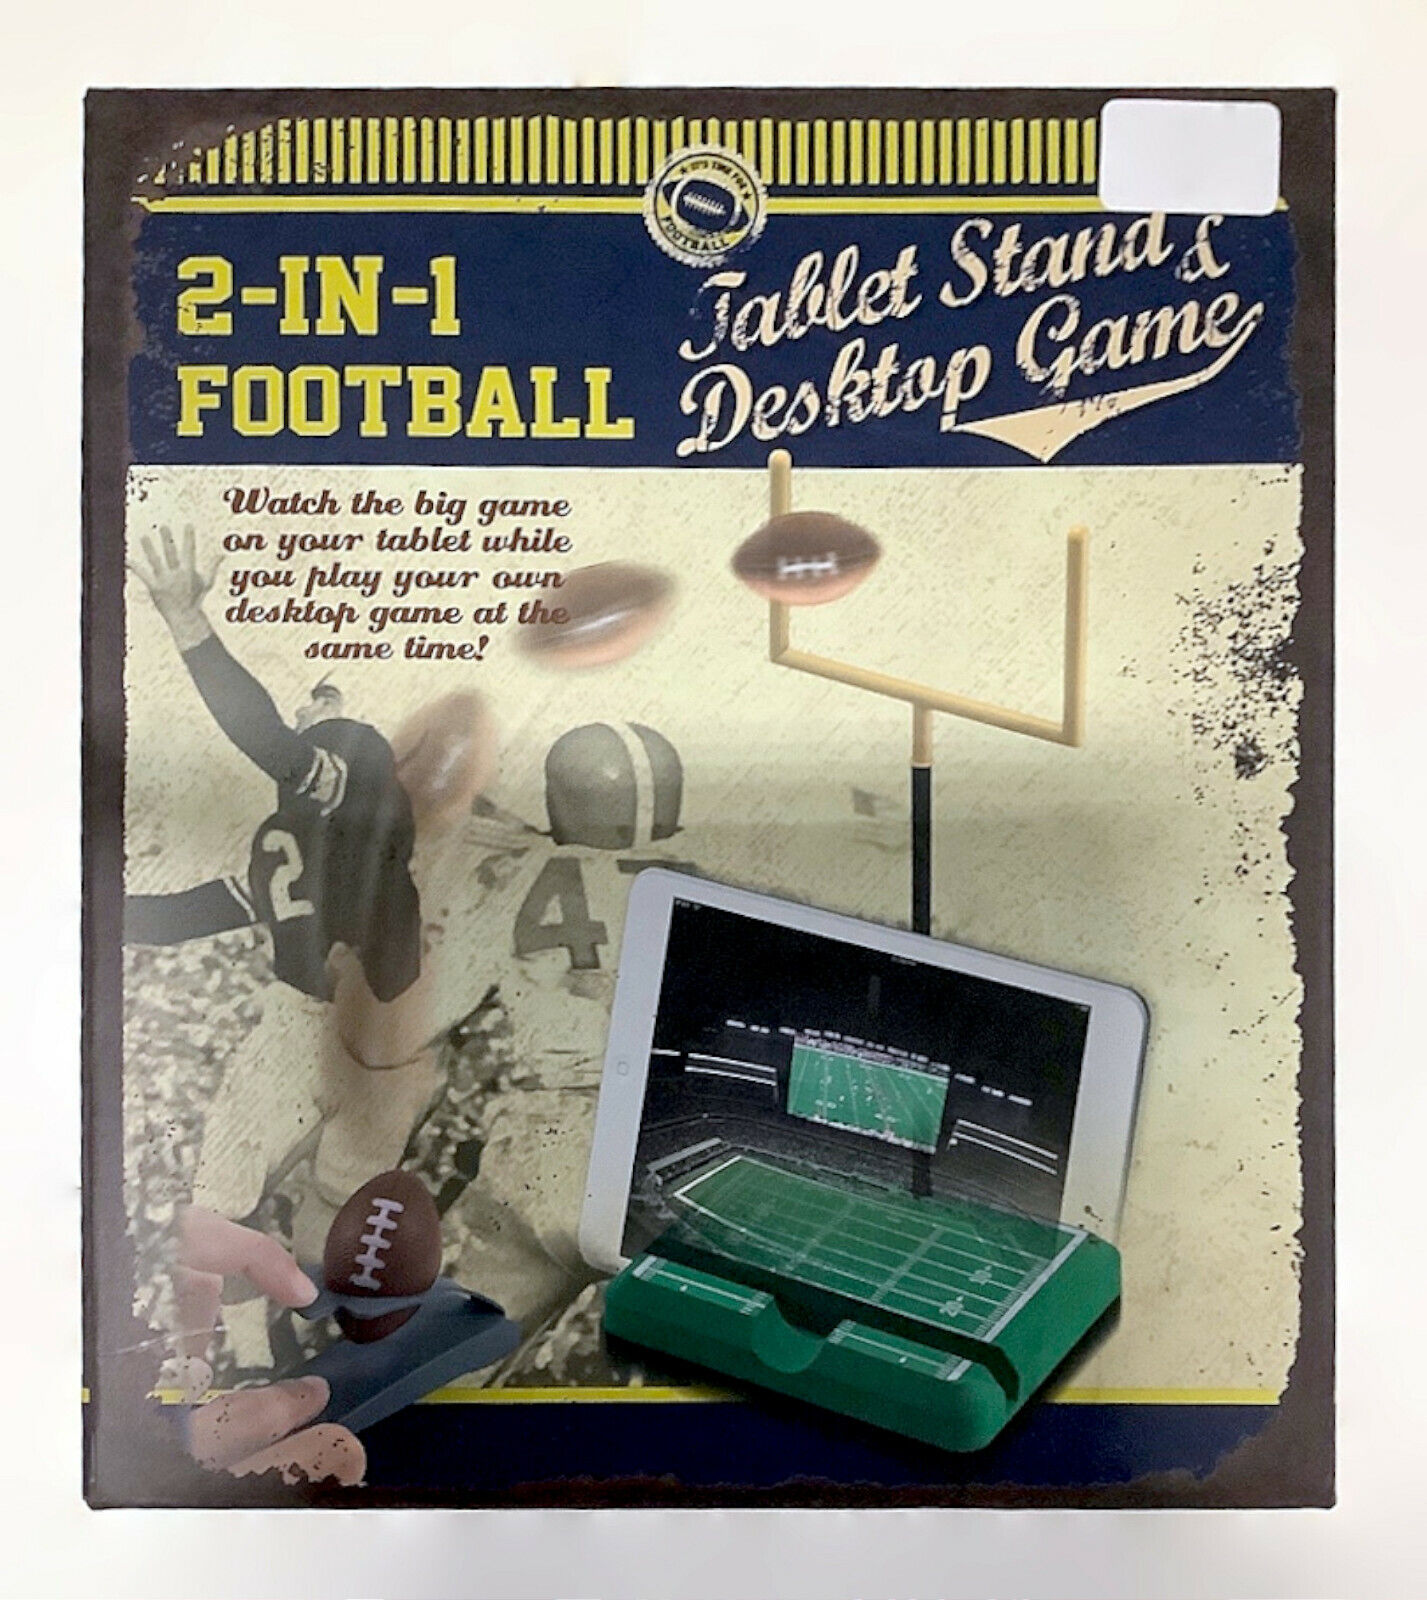 NEW 2-in-1 Football Stand & Desktop Game for Most Tablets gridiron goal sports